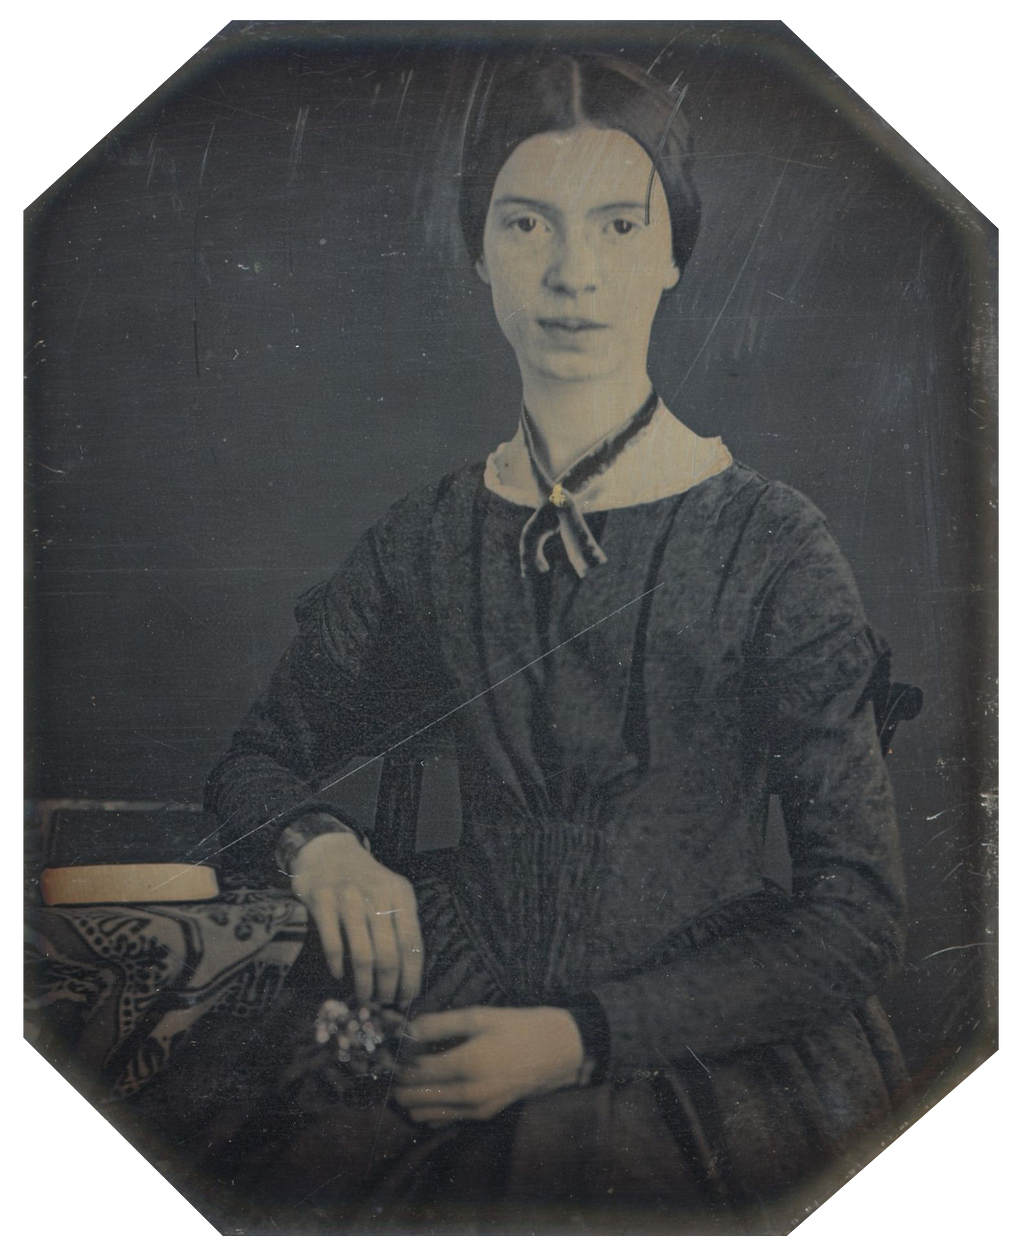 A public domain image of Emily Dickinson from Wikimedia Commons. https://commons.wikimedia.org/wiki/File:Black-white_photograph_of_Emily_Dickinson2.png